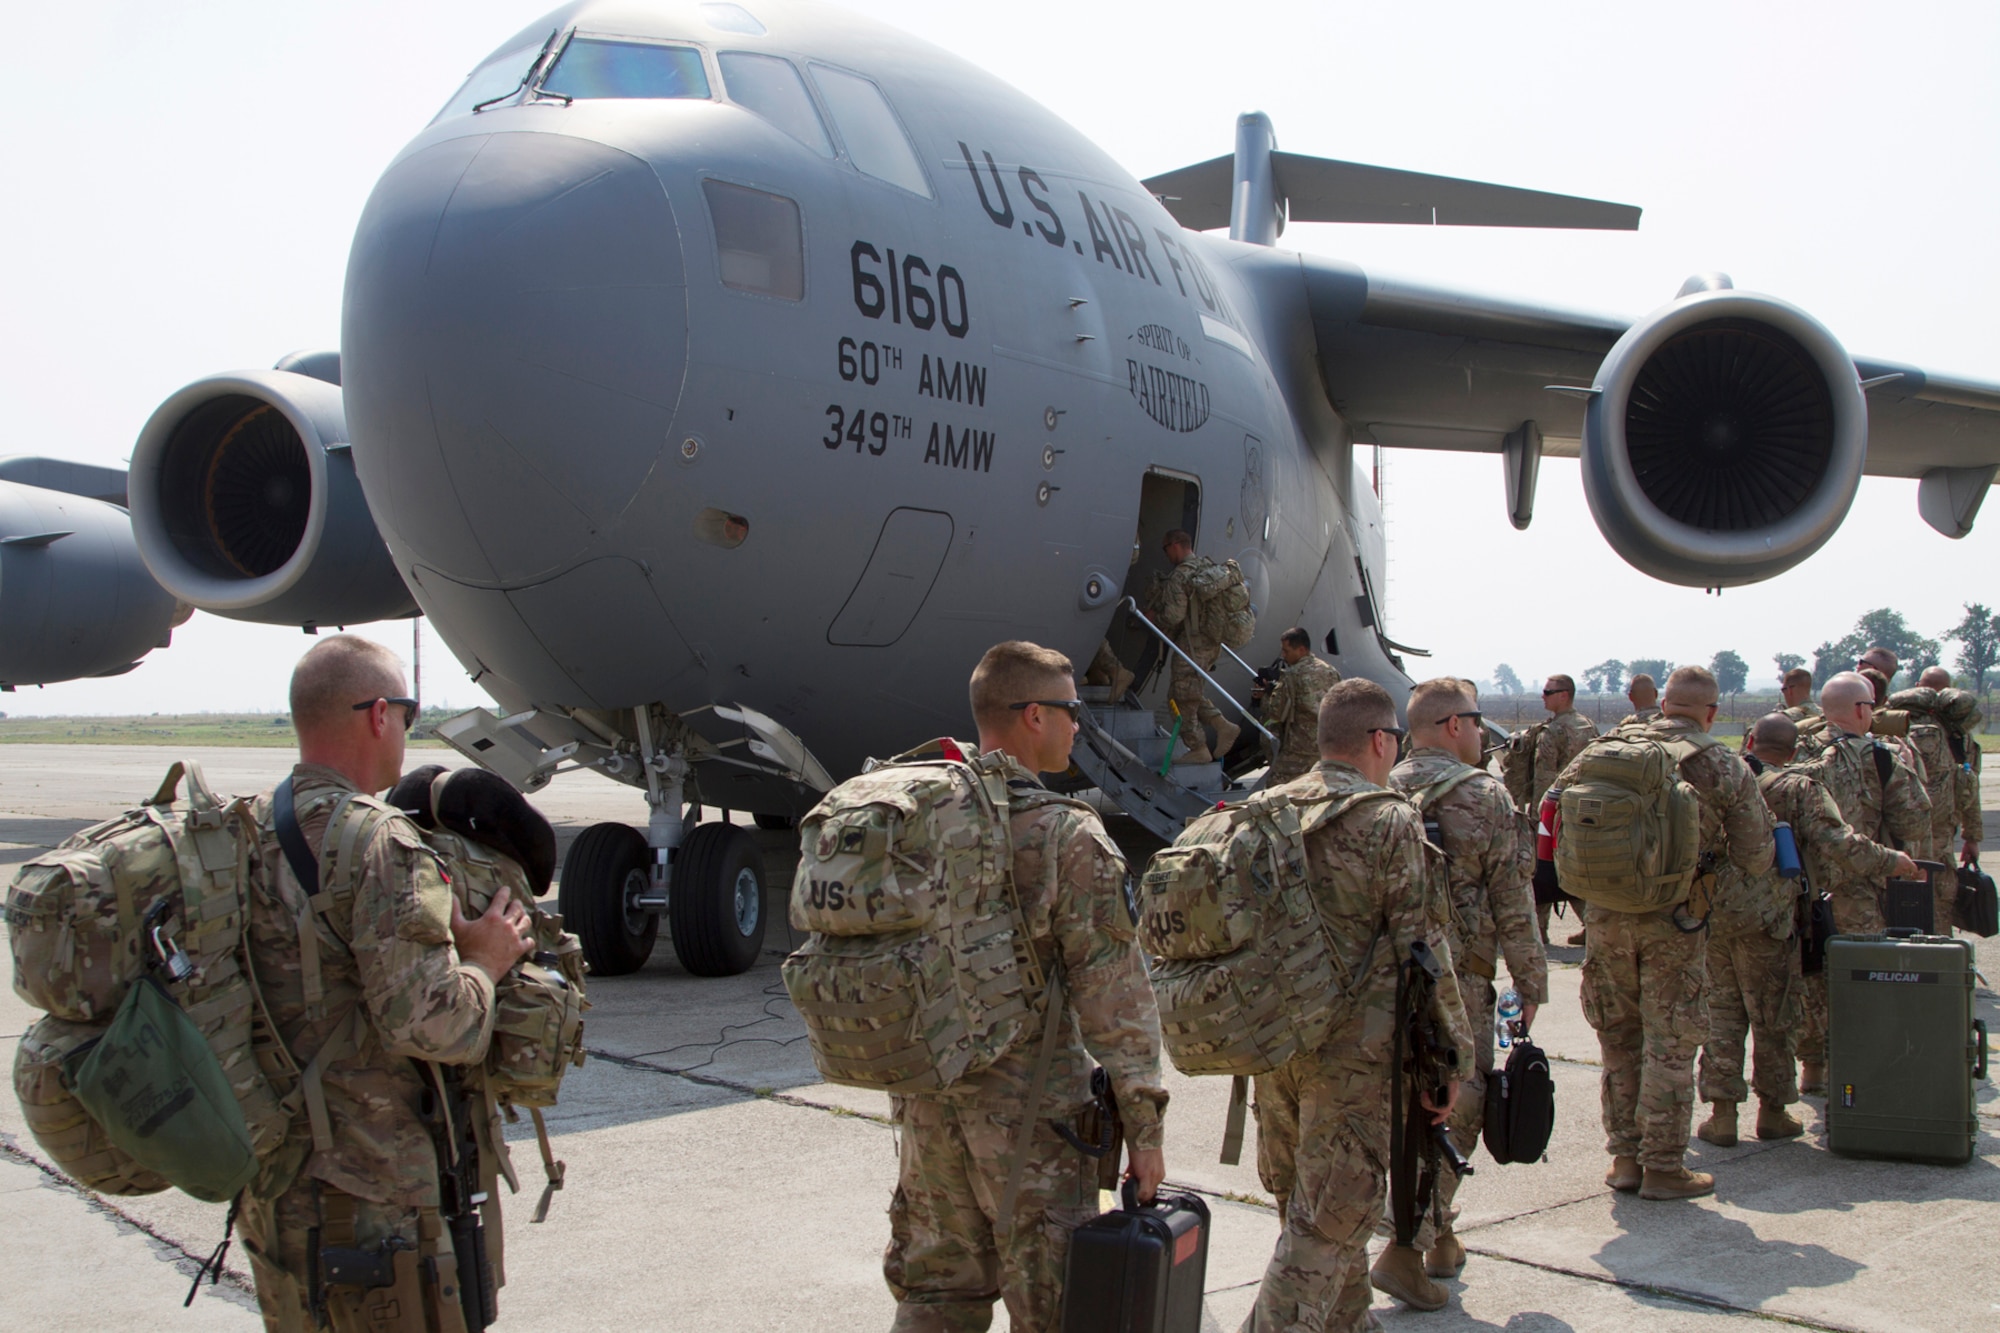 Oregon Army National Guard, 41st Infantry Brigade Combat Team Soldiers from load onto a C-17 Globemaster III Aug. 13, 2013, bound for Afghanistan from Mihail Kogalniceanu Air Base, Romania. The flight is one of more than 500, deploying and redeploying transportation missions, that the U.S. Army Europe's 21st Theater Sustainment Command and Air Force's 780th Expeditionary Airlift Squadron have supported since opening the transit hub in February 2014. (U.S. Army photo/Sgt. Brandon Hubbard)